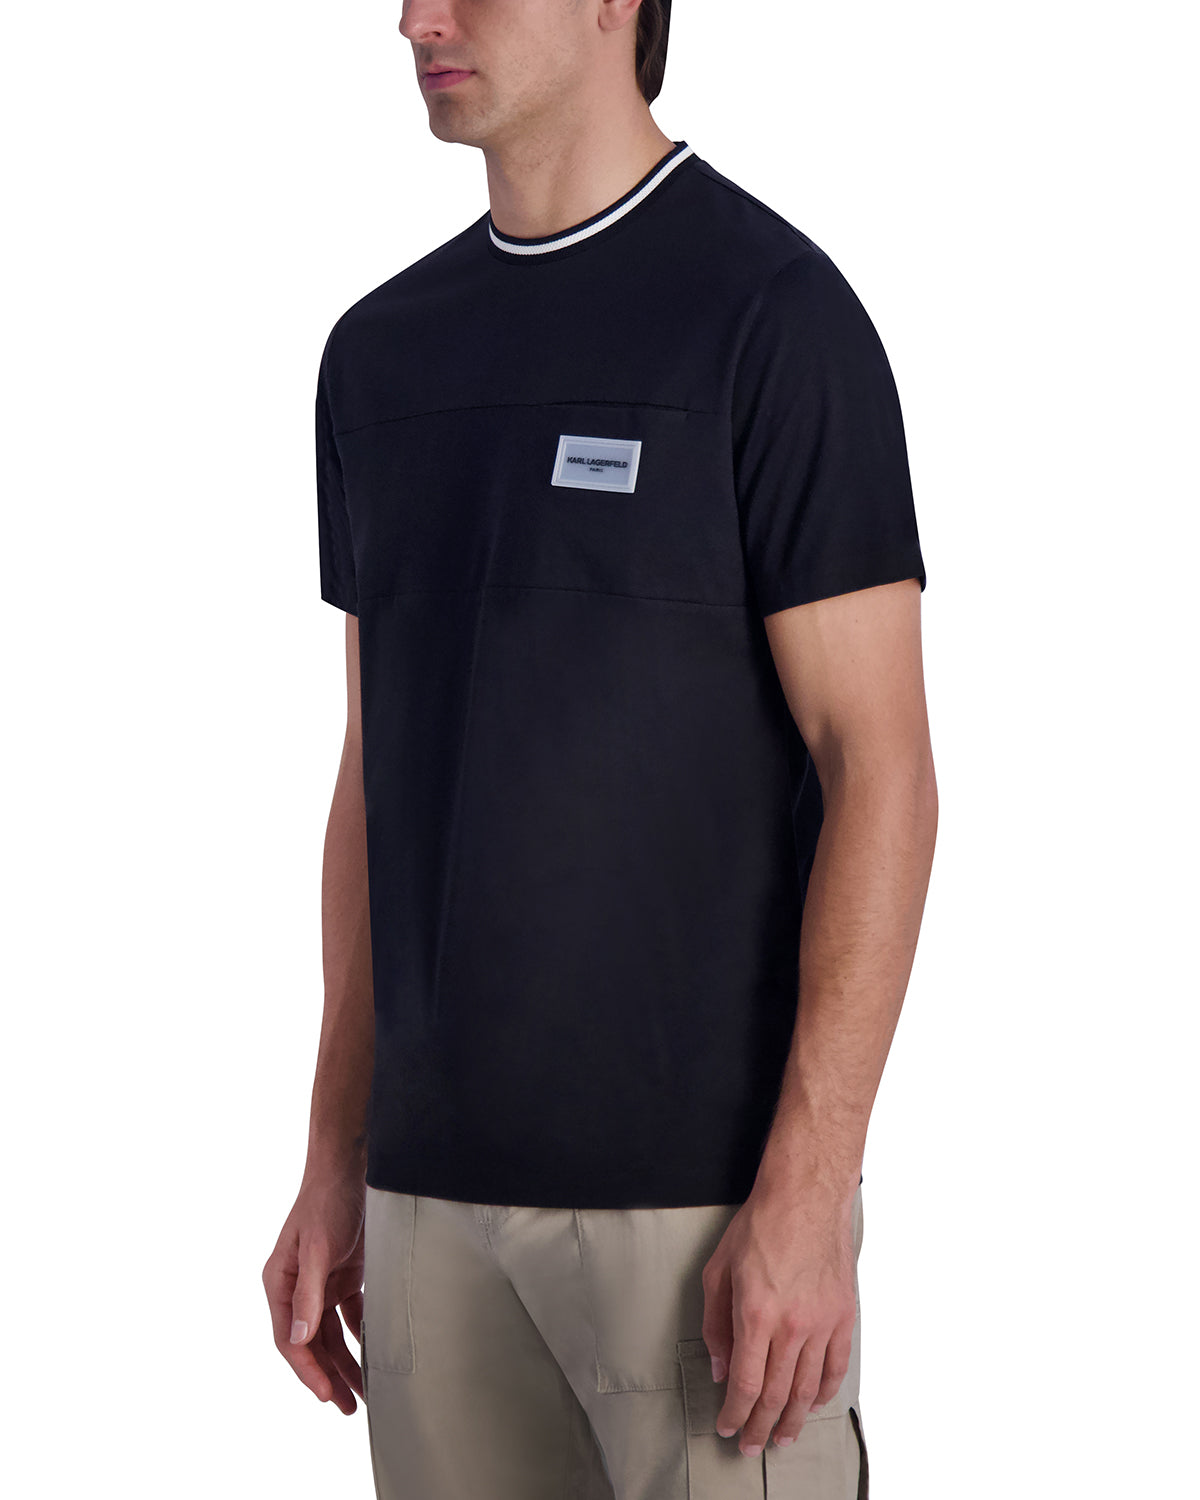 CONTRAST TRIM COLLAR T-SHIRT WITH CHEST POCKET